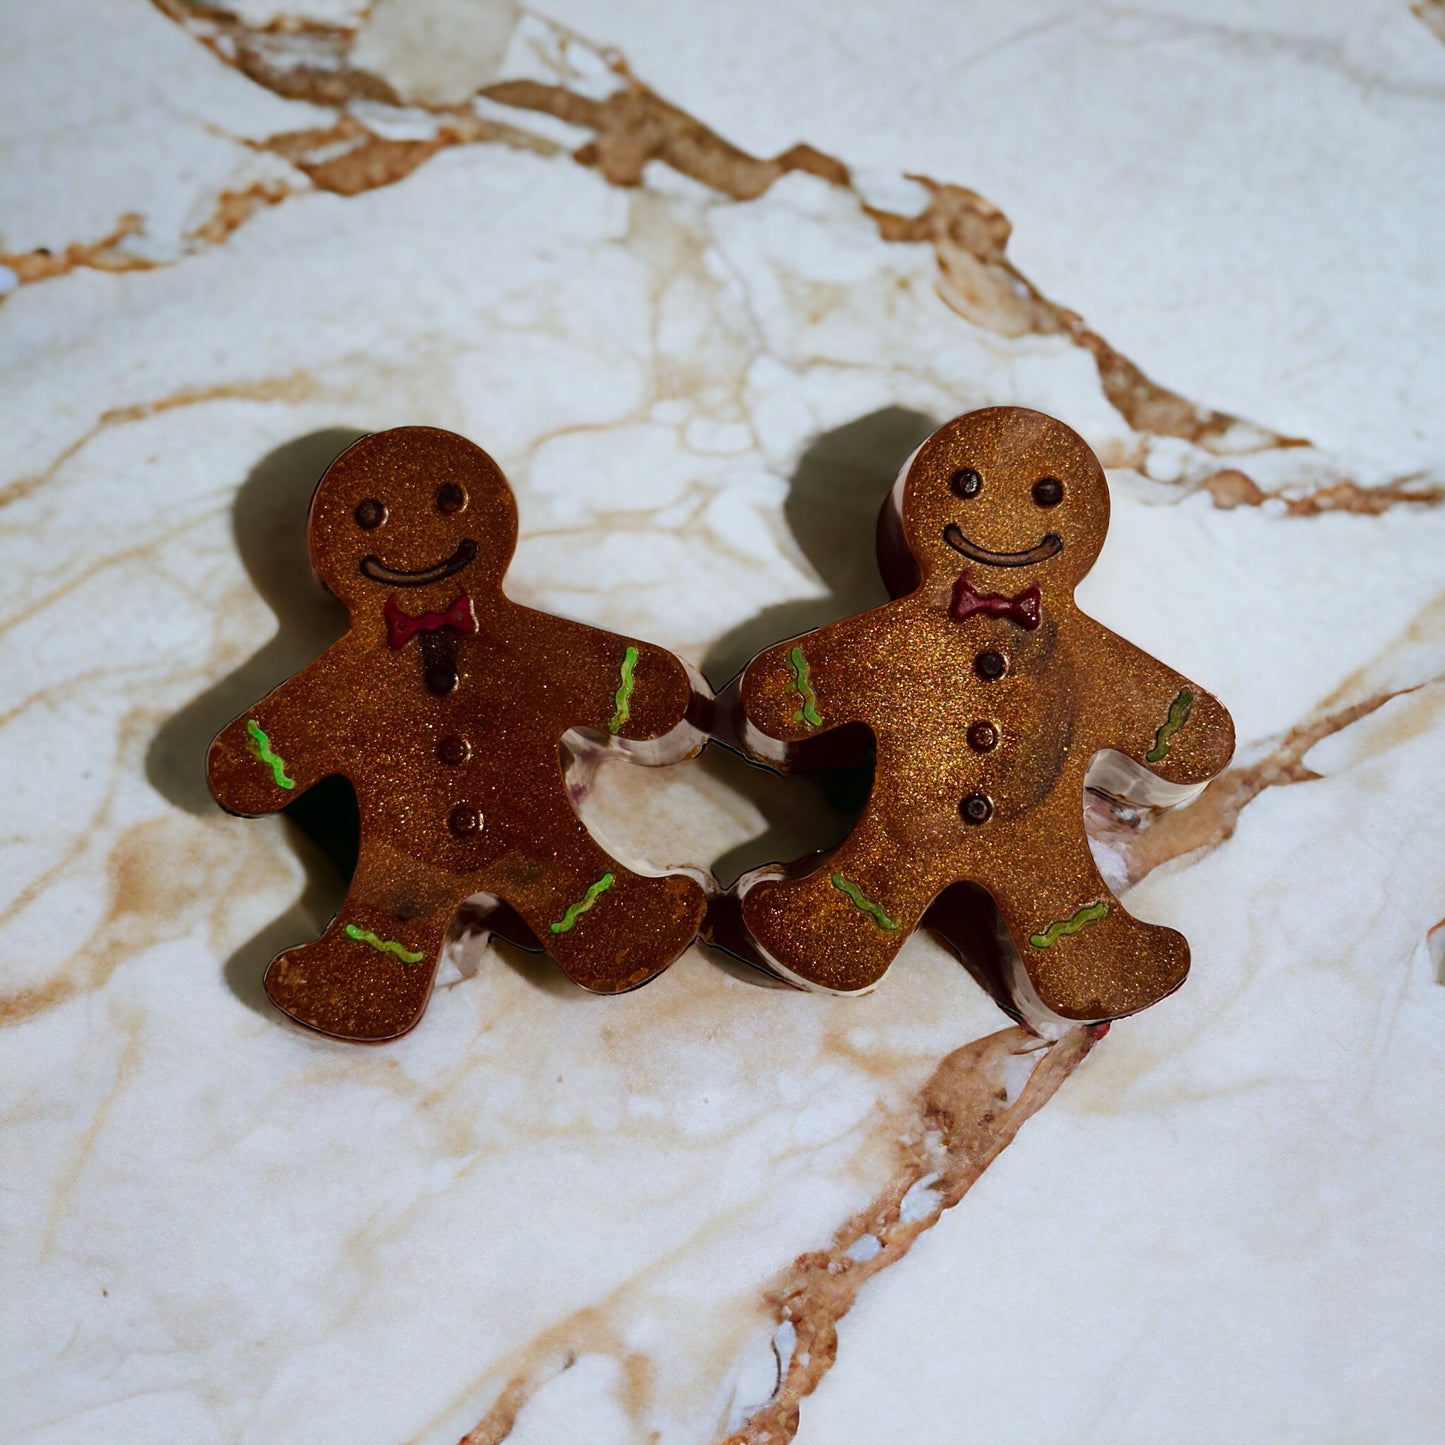 Gingerbread Cookie Wax Melts